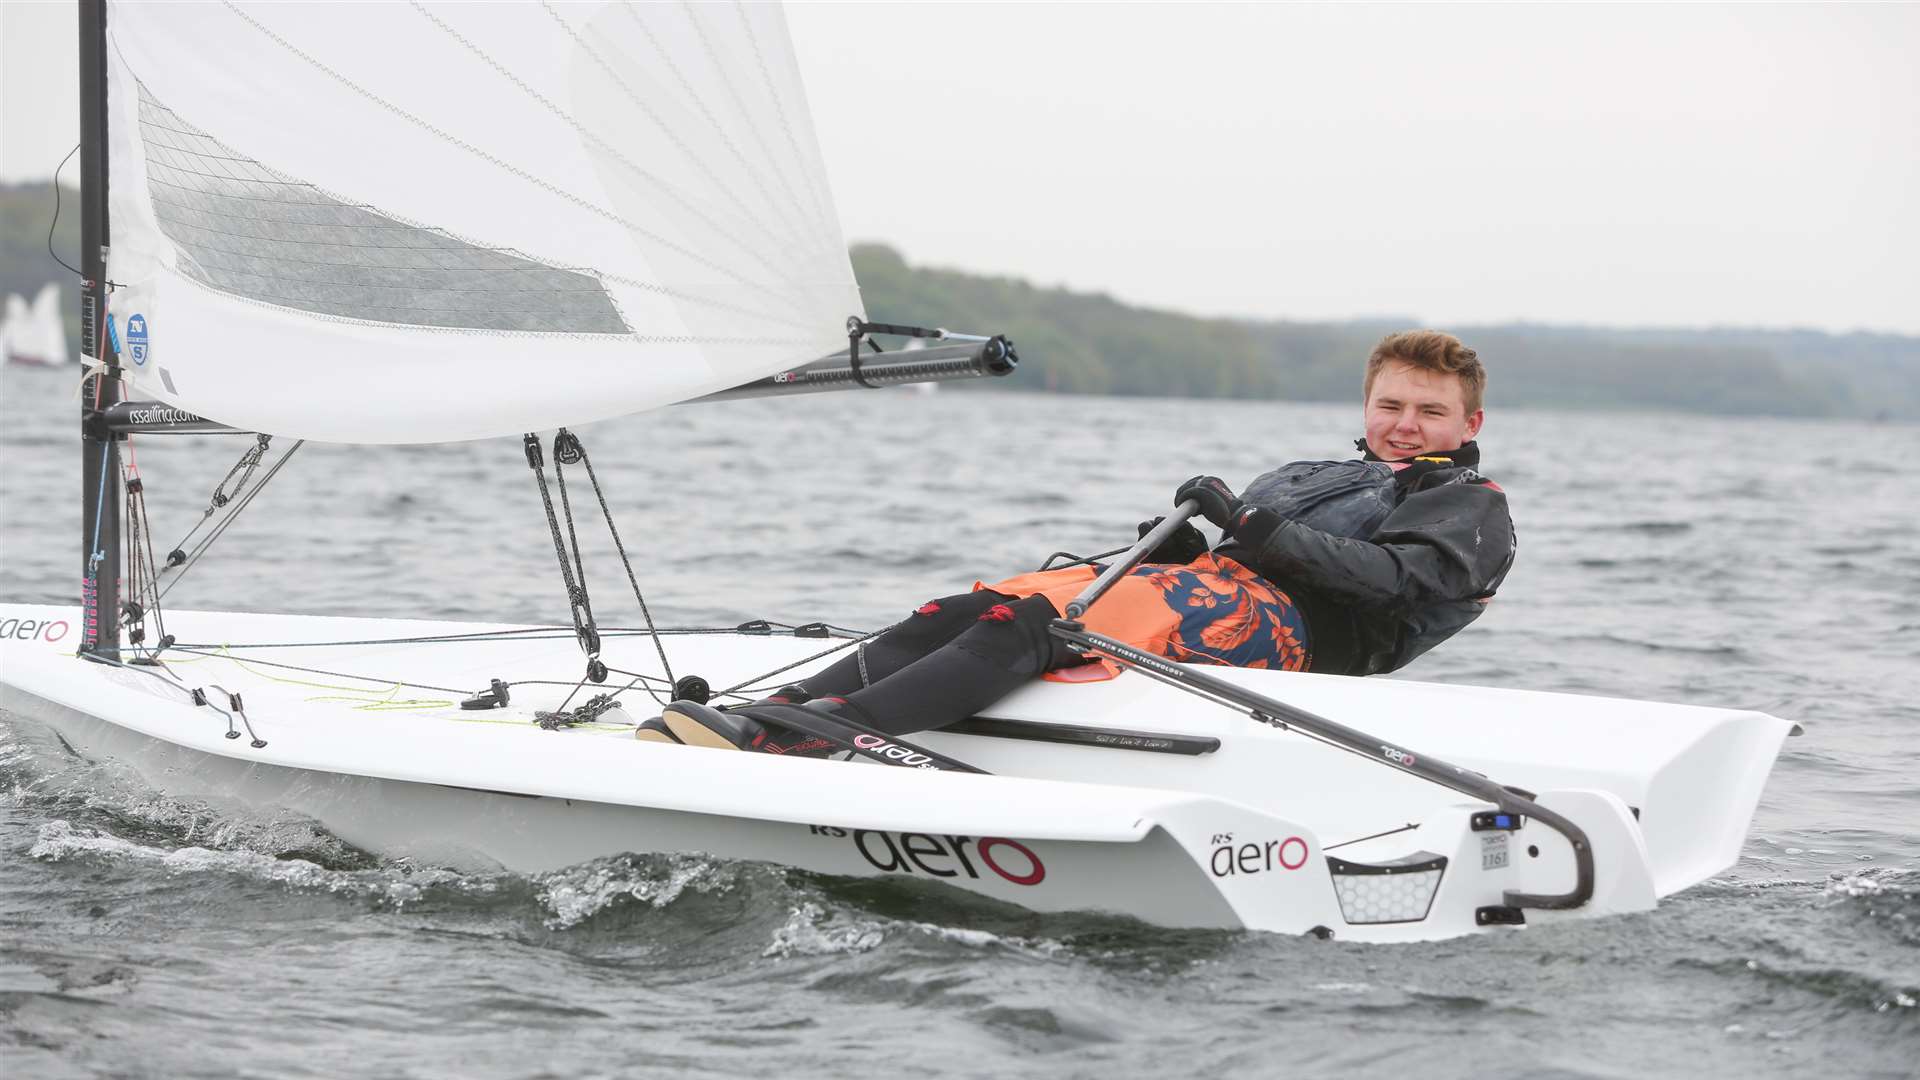 Sailor Lewis Keen in an RS Aero on Bewl Water